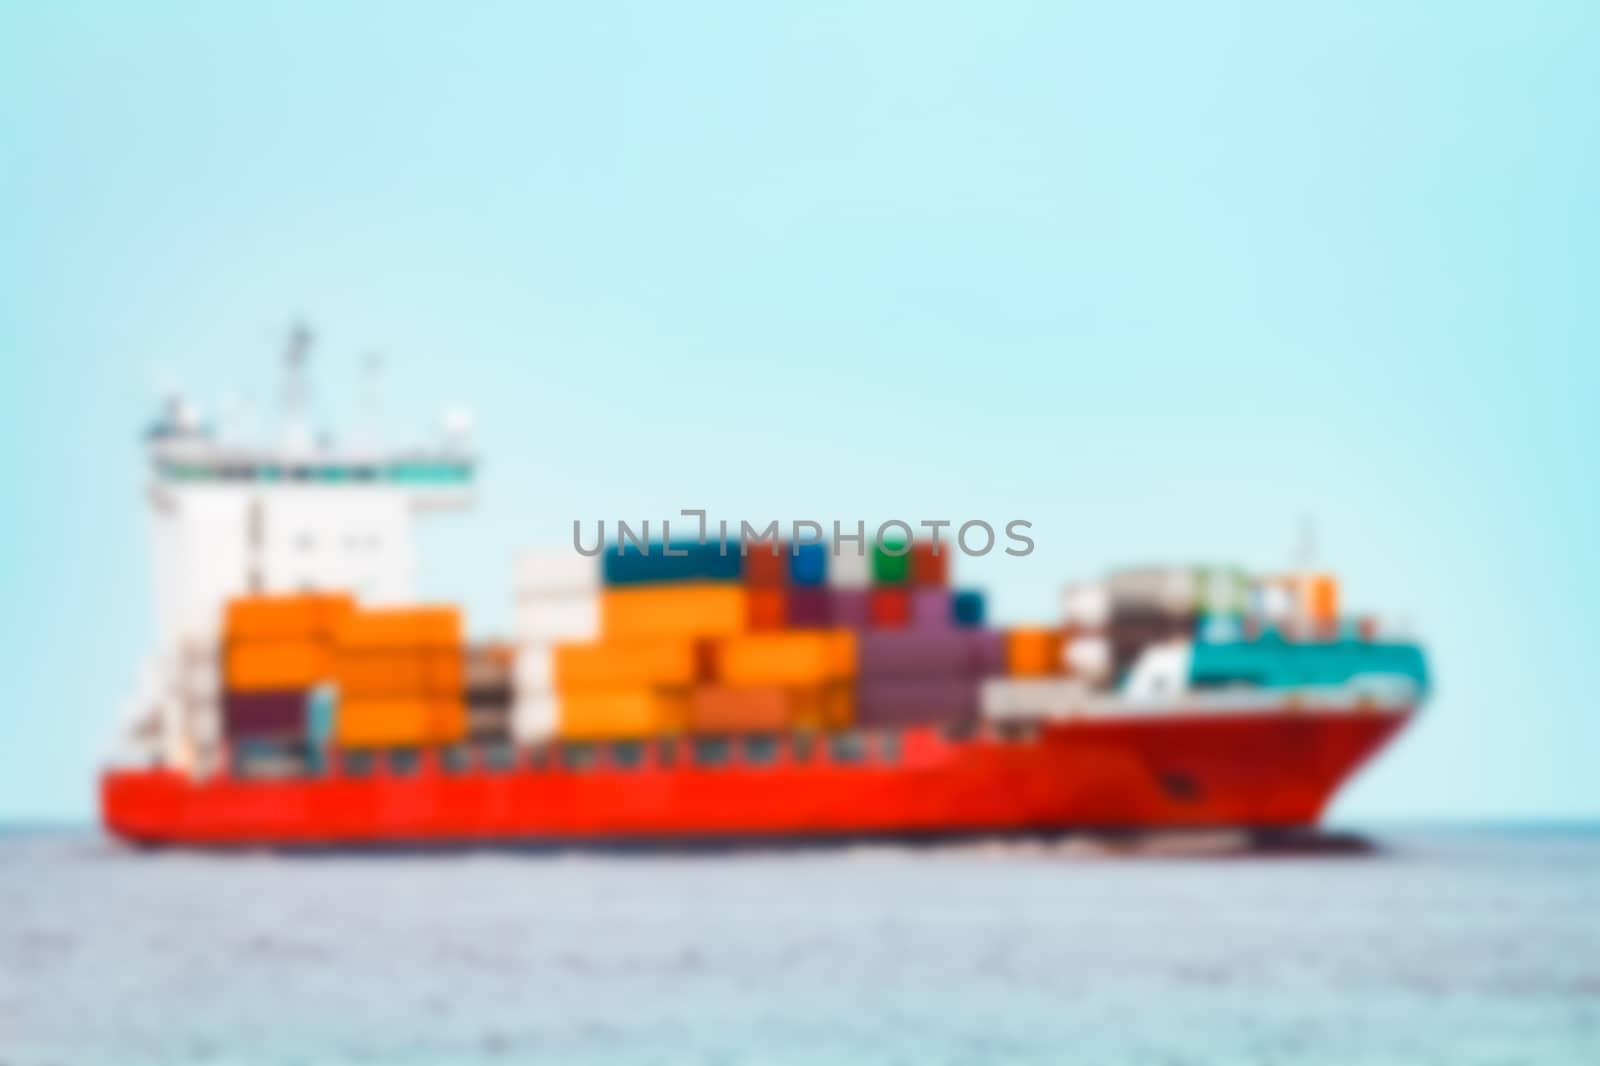 Red cargo ship - blurred image by sengnsp